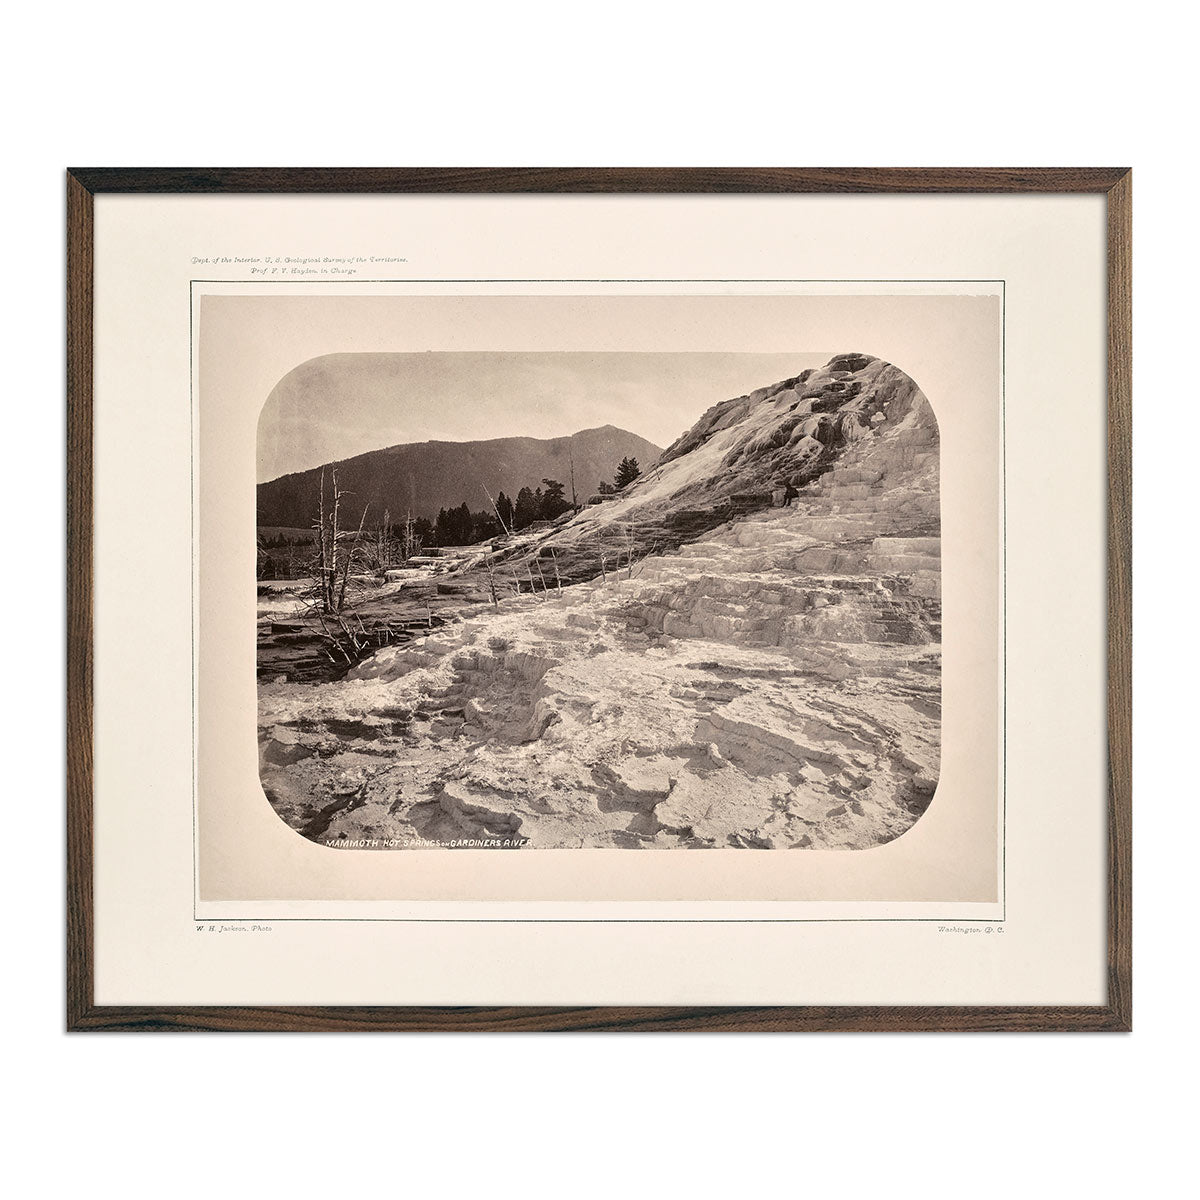 Photograph of Mammoth Hot Springs on Gardiner's River